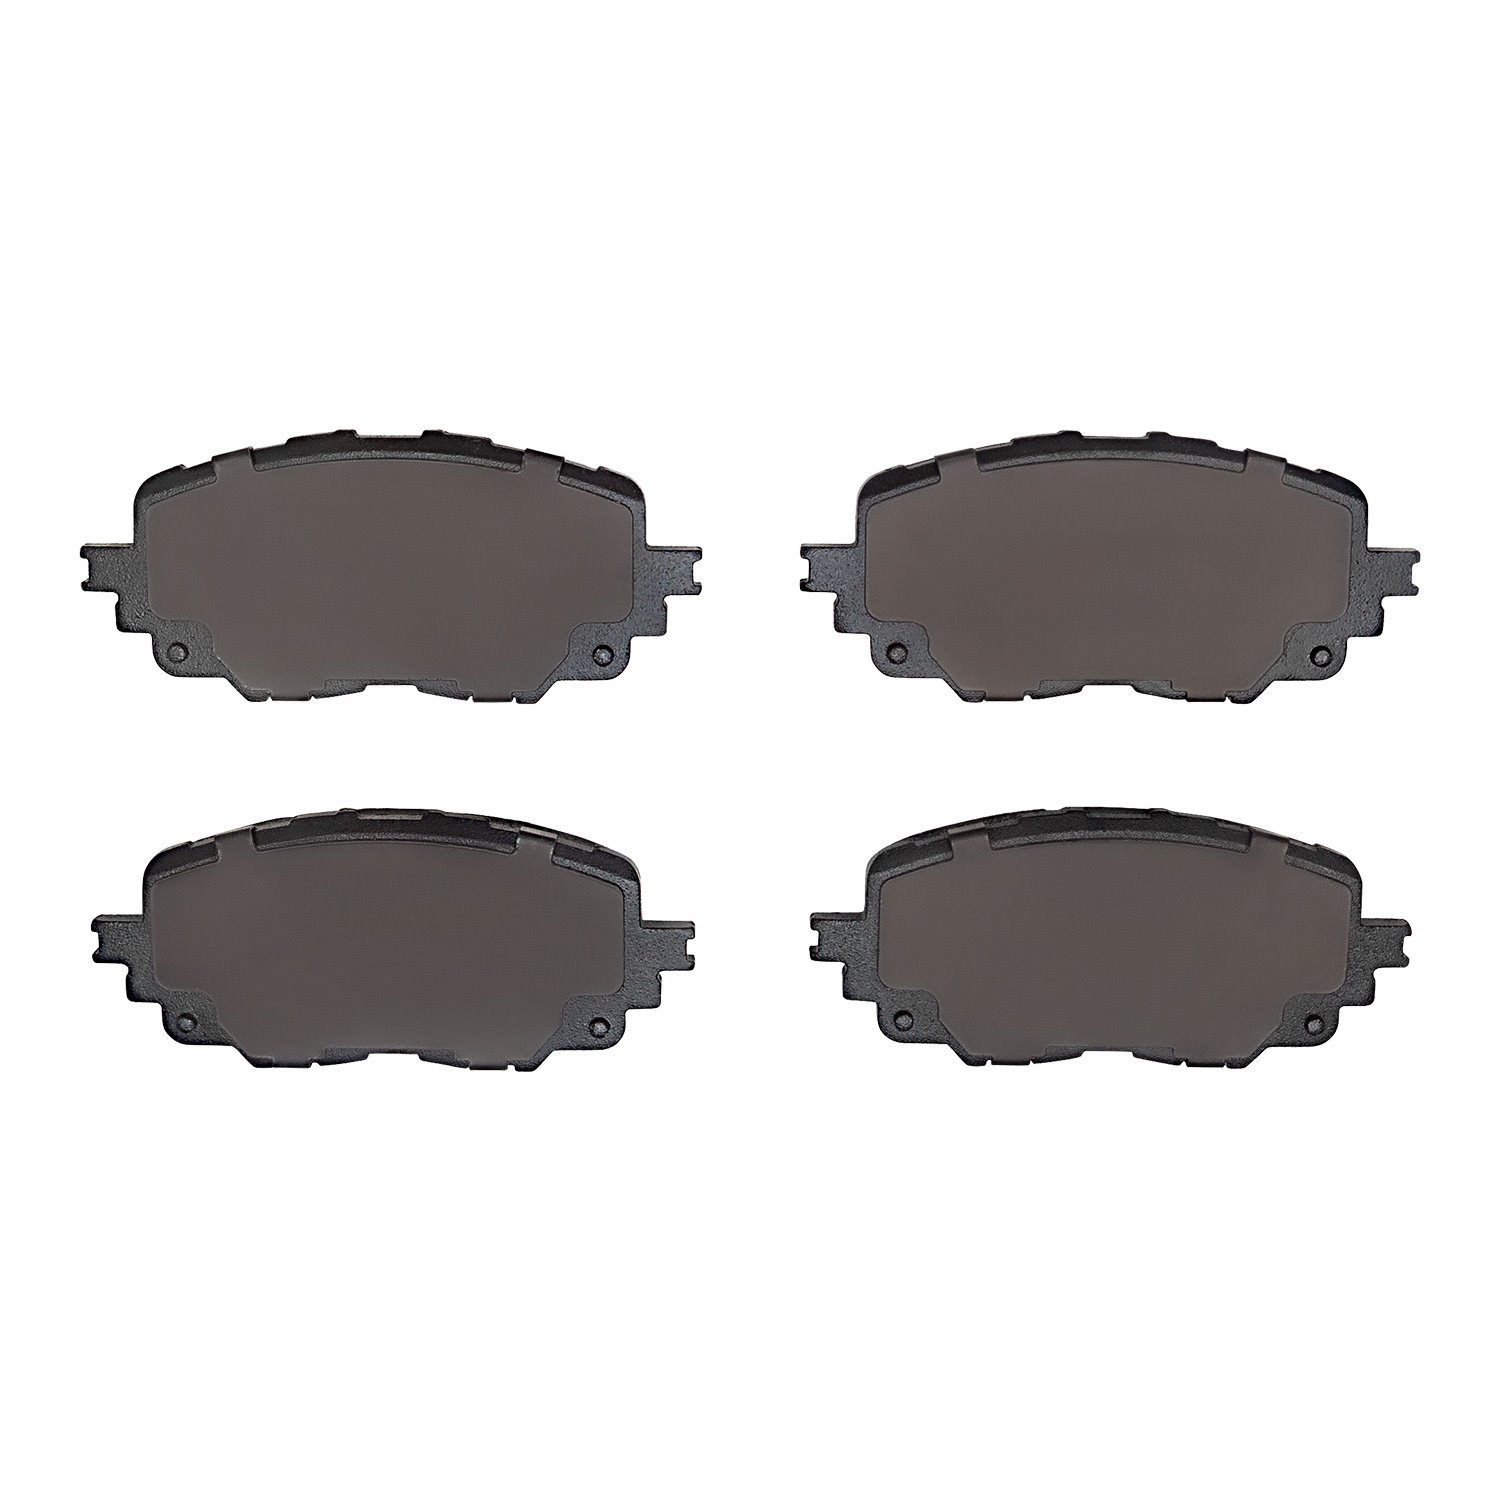 1310-1903-00 3000-Series Ceramic Brake Pads, Fits Select Multiple Makes/Models, Position: Front